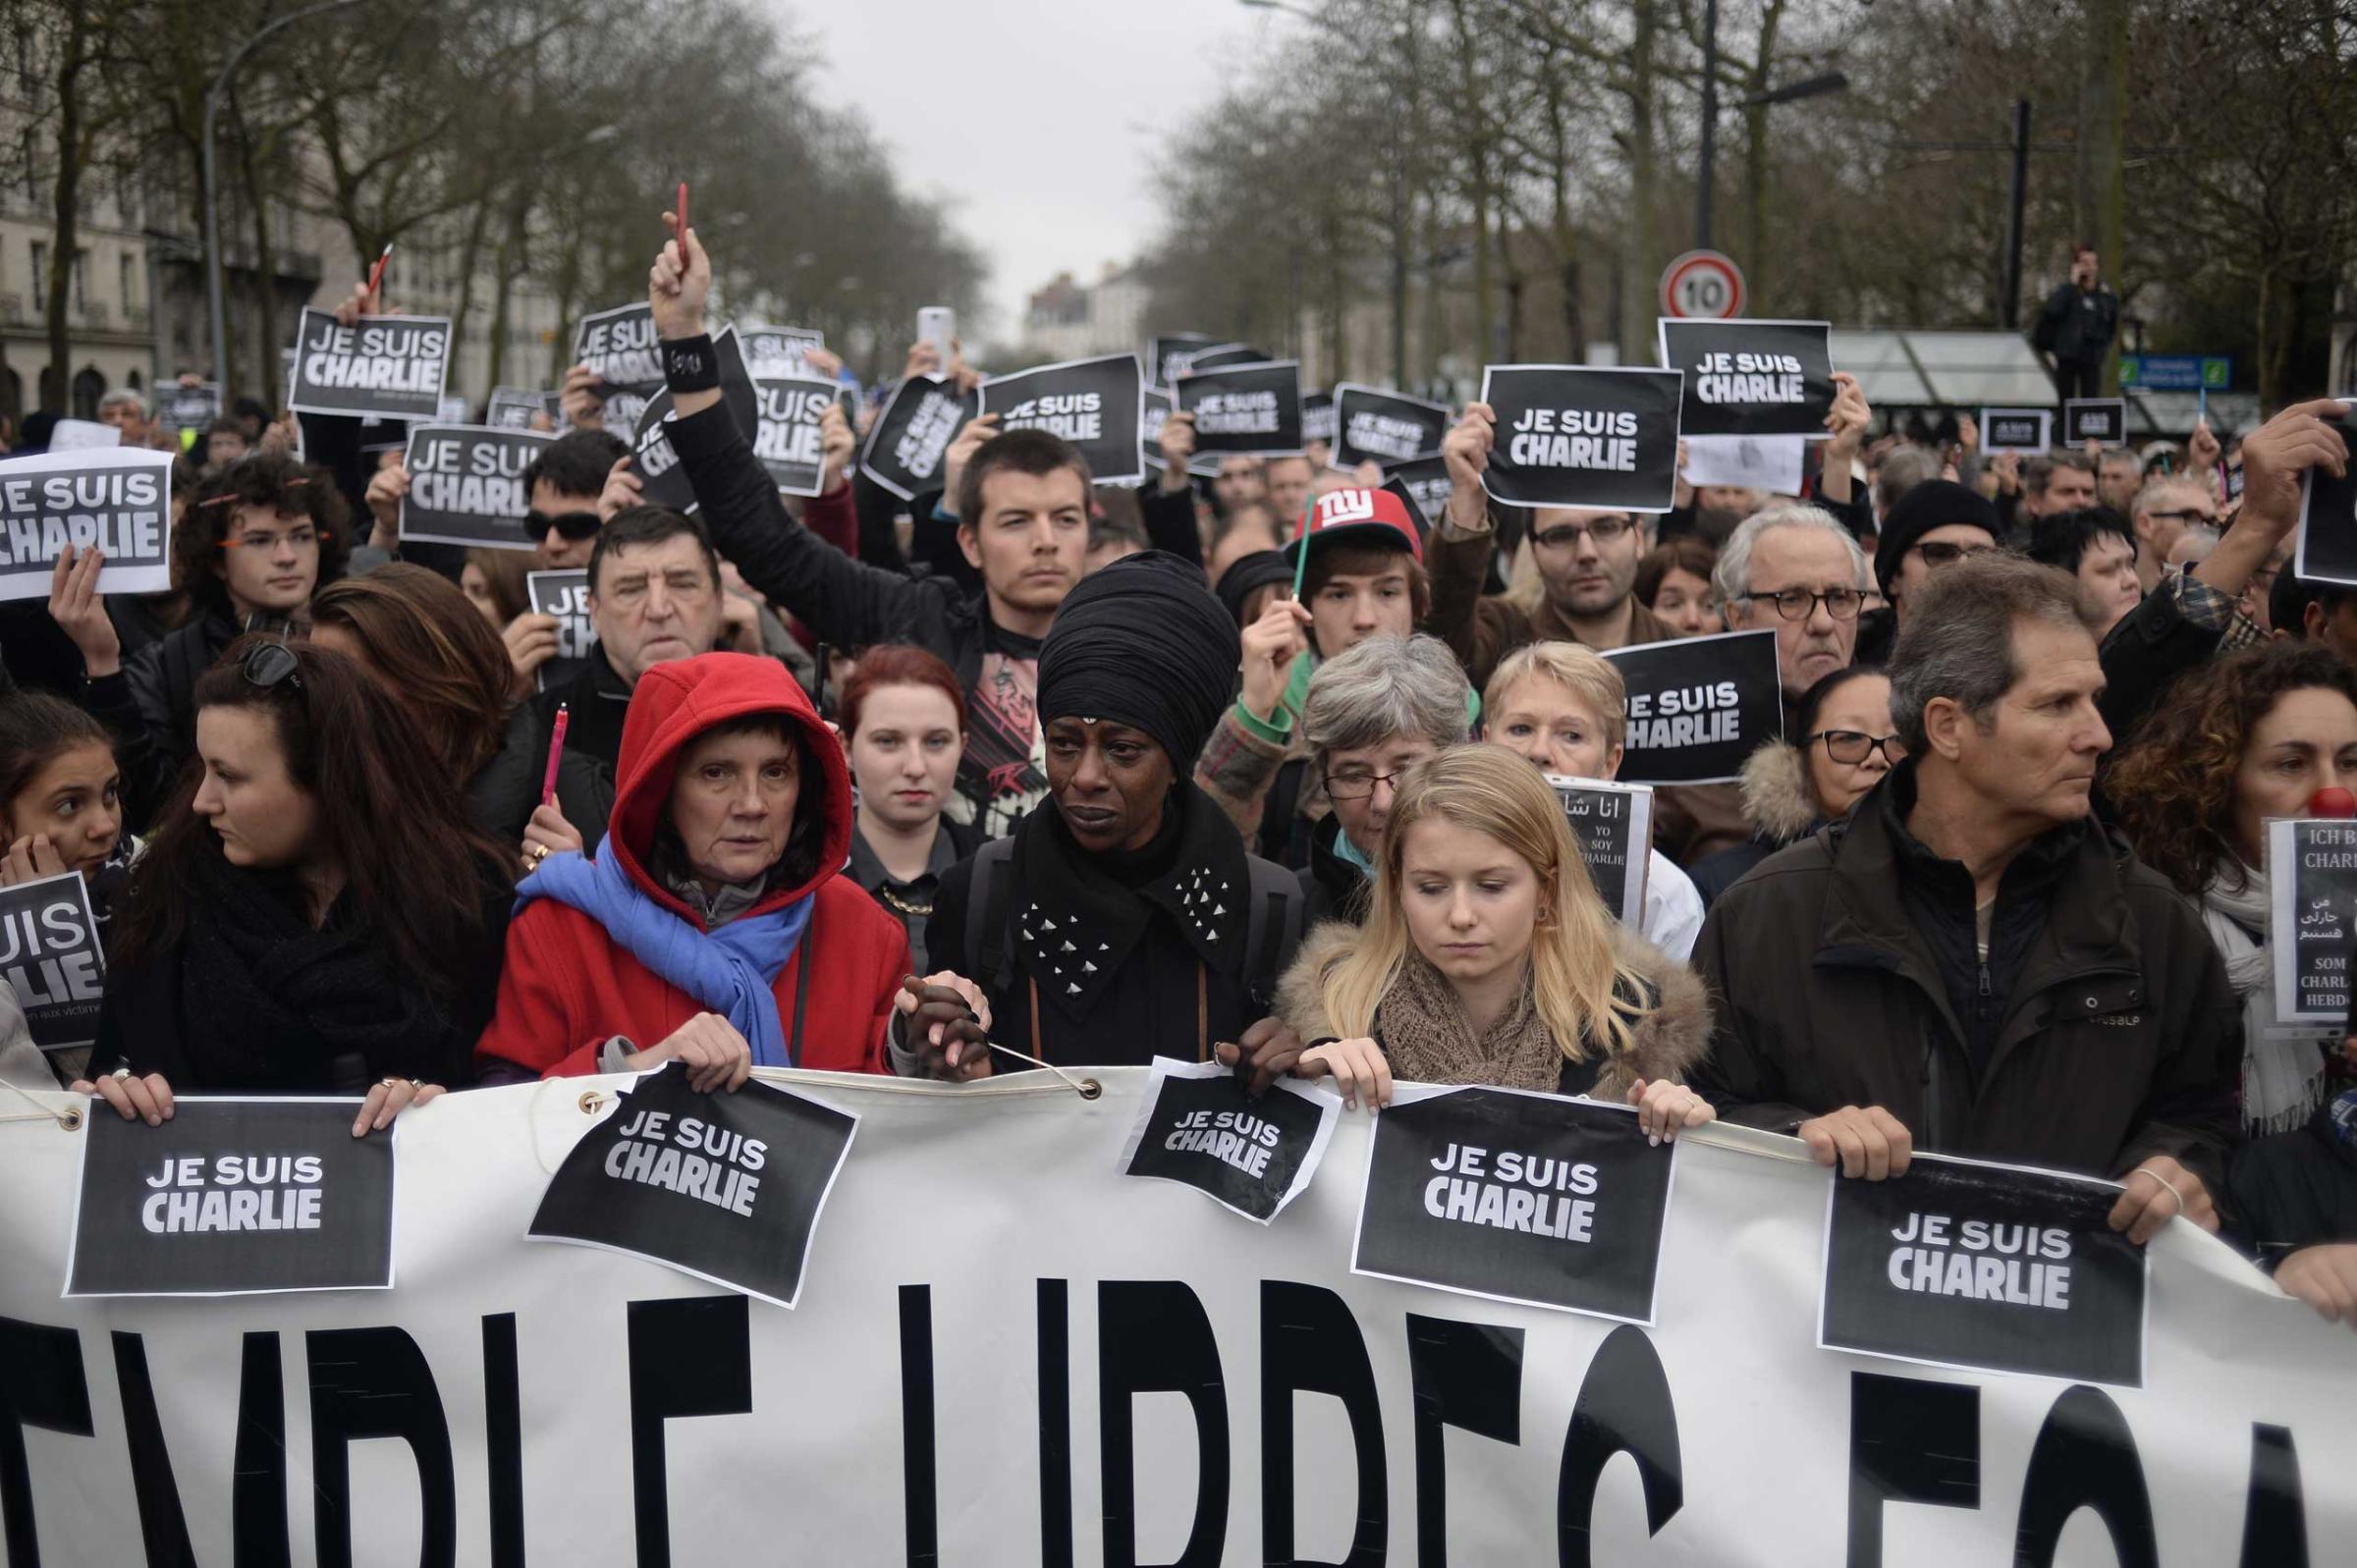 Demonstrators hold signs that reads "Je suis Charlie" during a rally in Nantes on Jan. 10, 2015,.